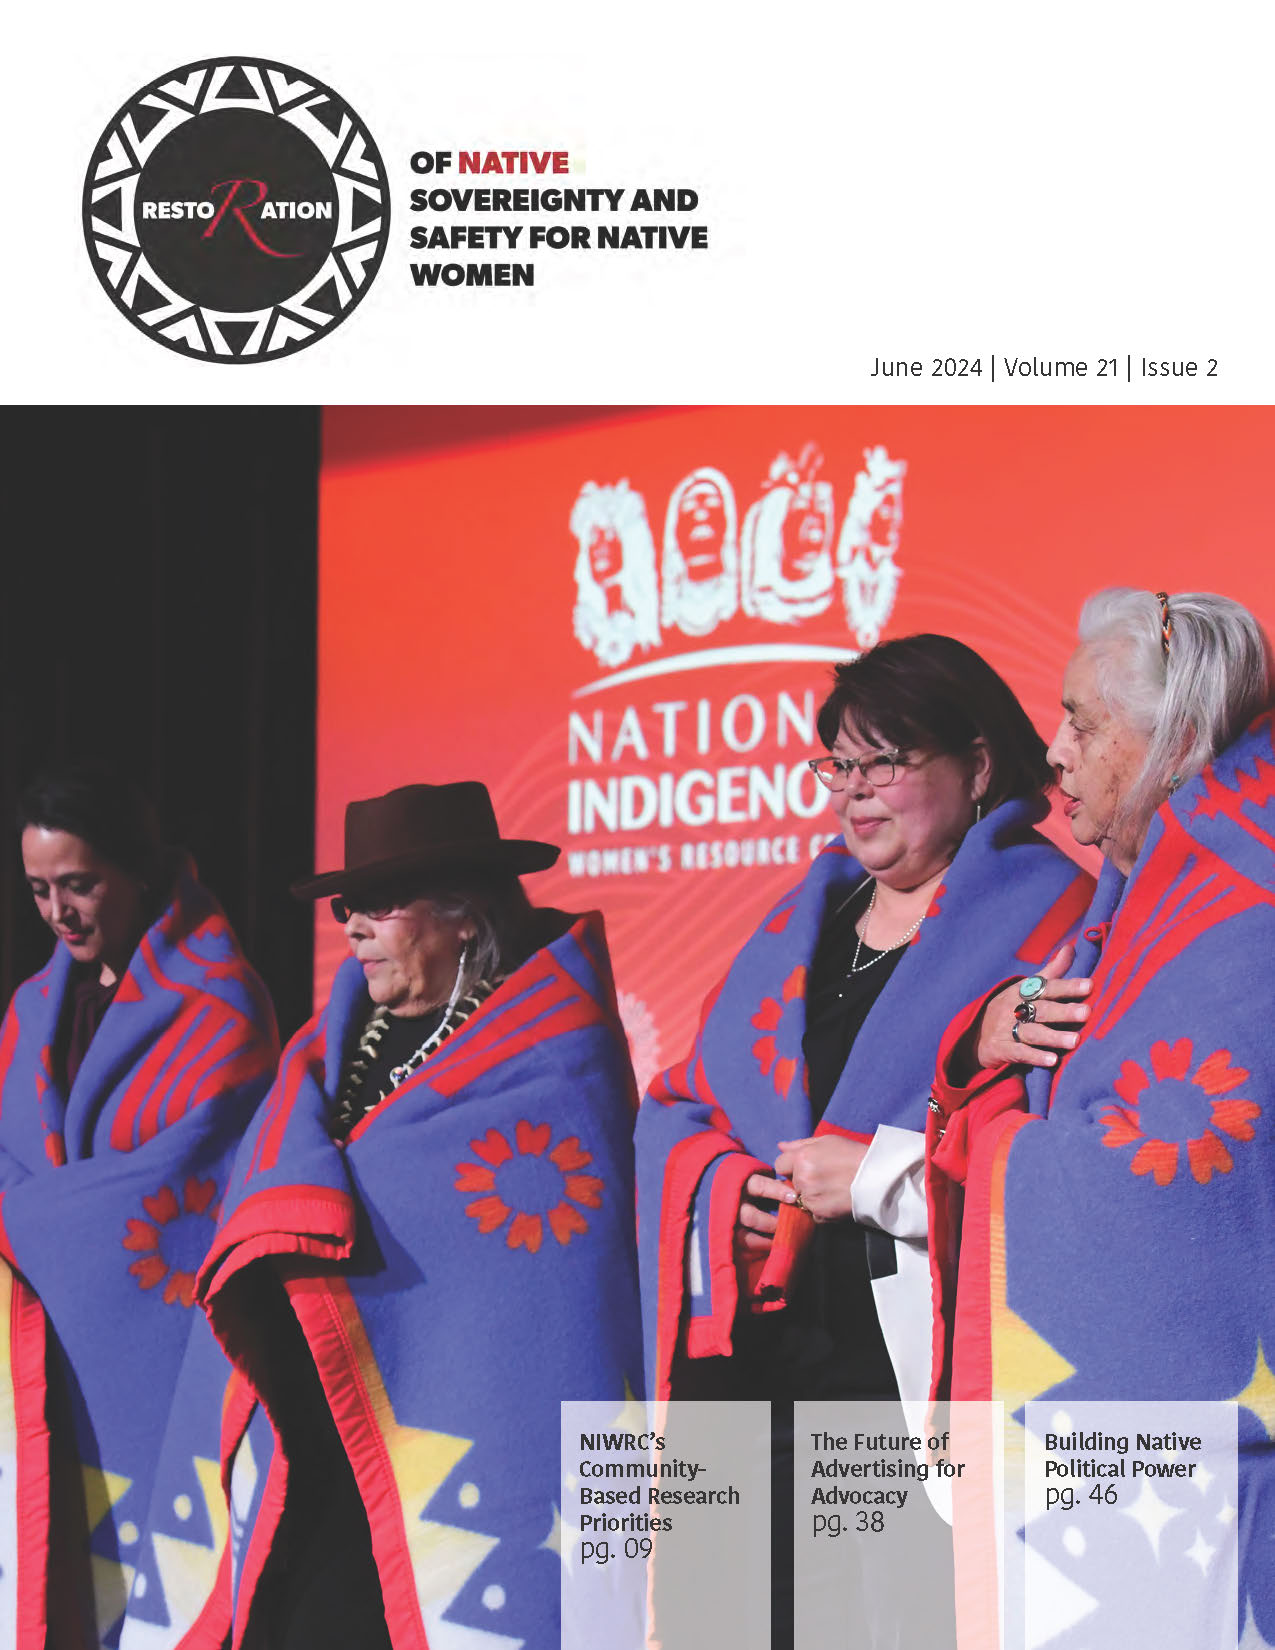 June 2024 cover: Four Indigenous women draped with gift blankets on stage.